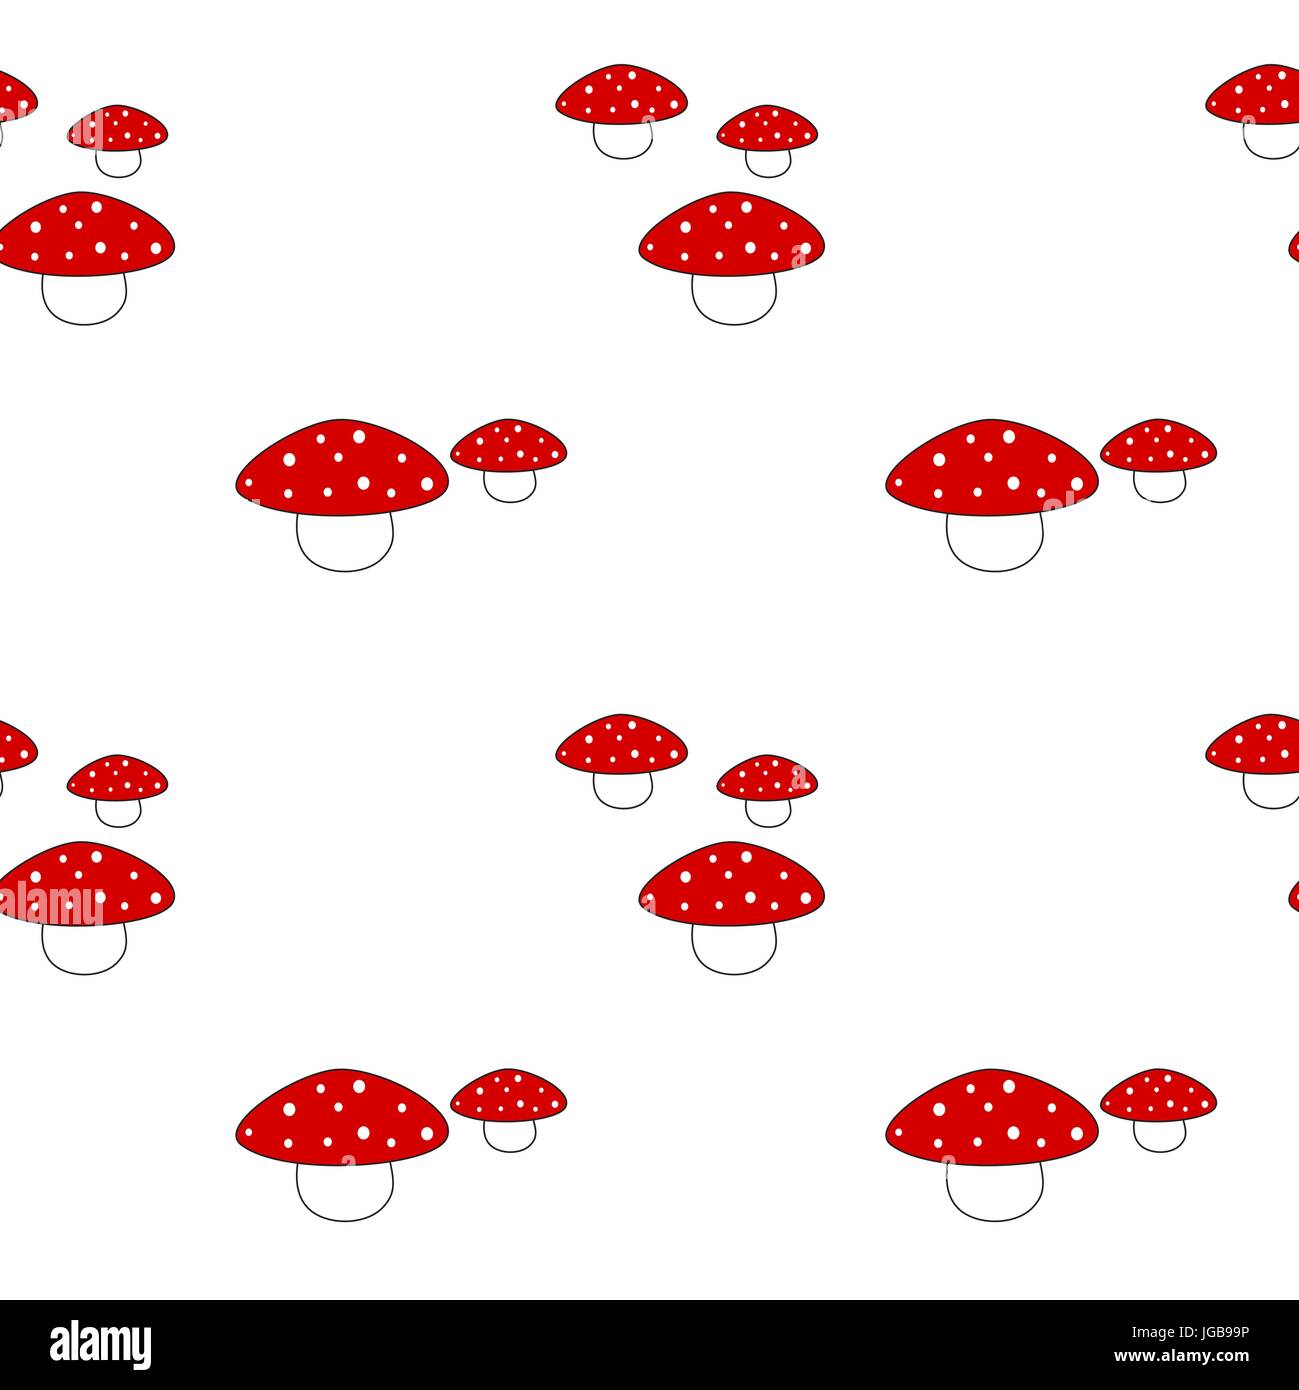 Cute Red Cartoon Mushrooms On White Background Seamless Vector